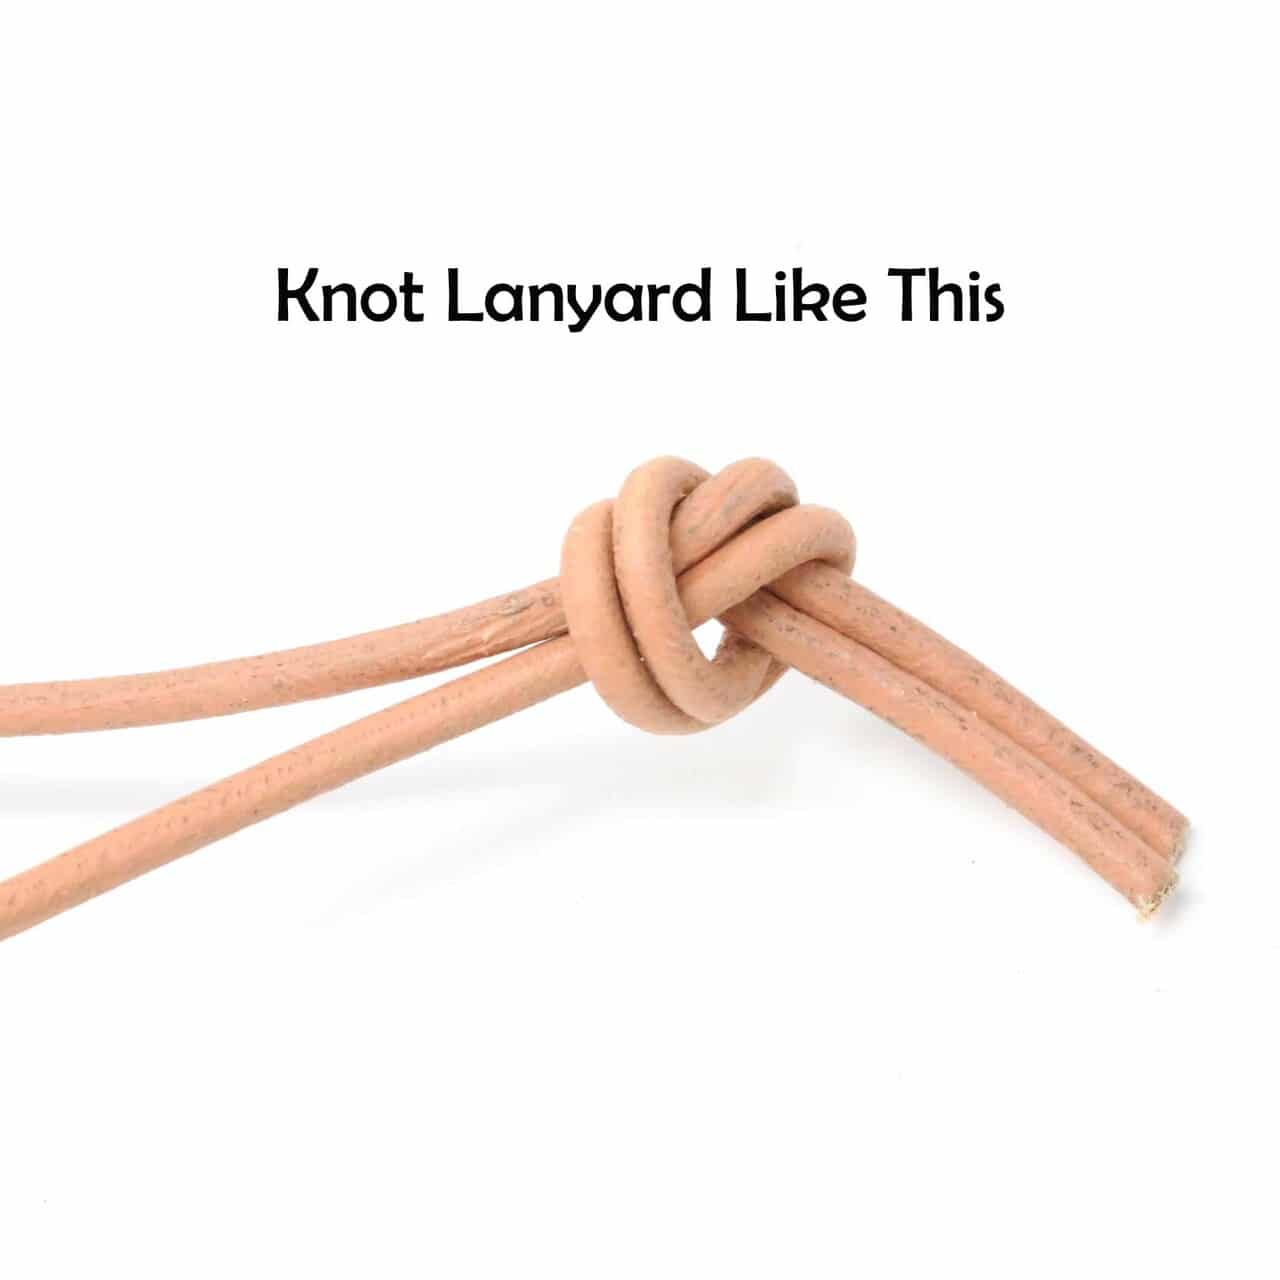 Proper way to knot the lanyard cord so that it does not unravel.